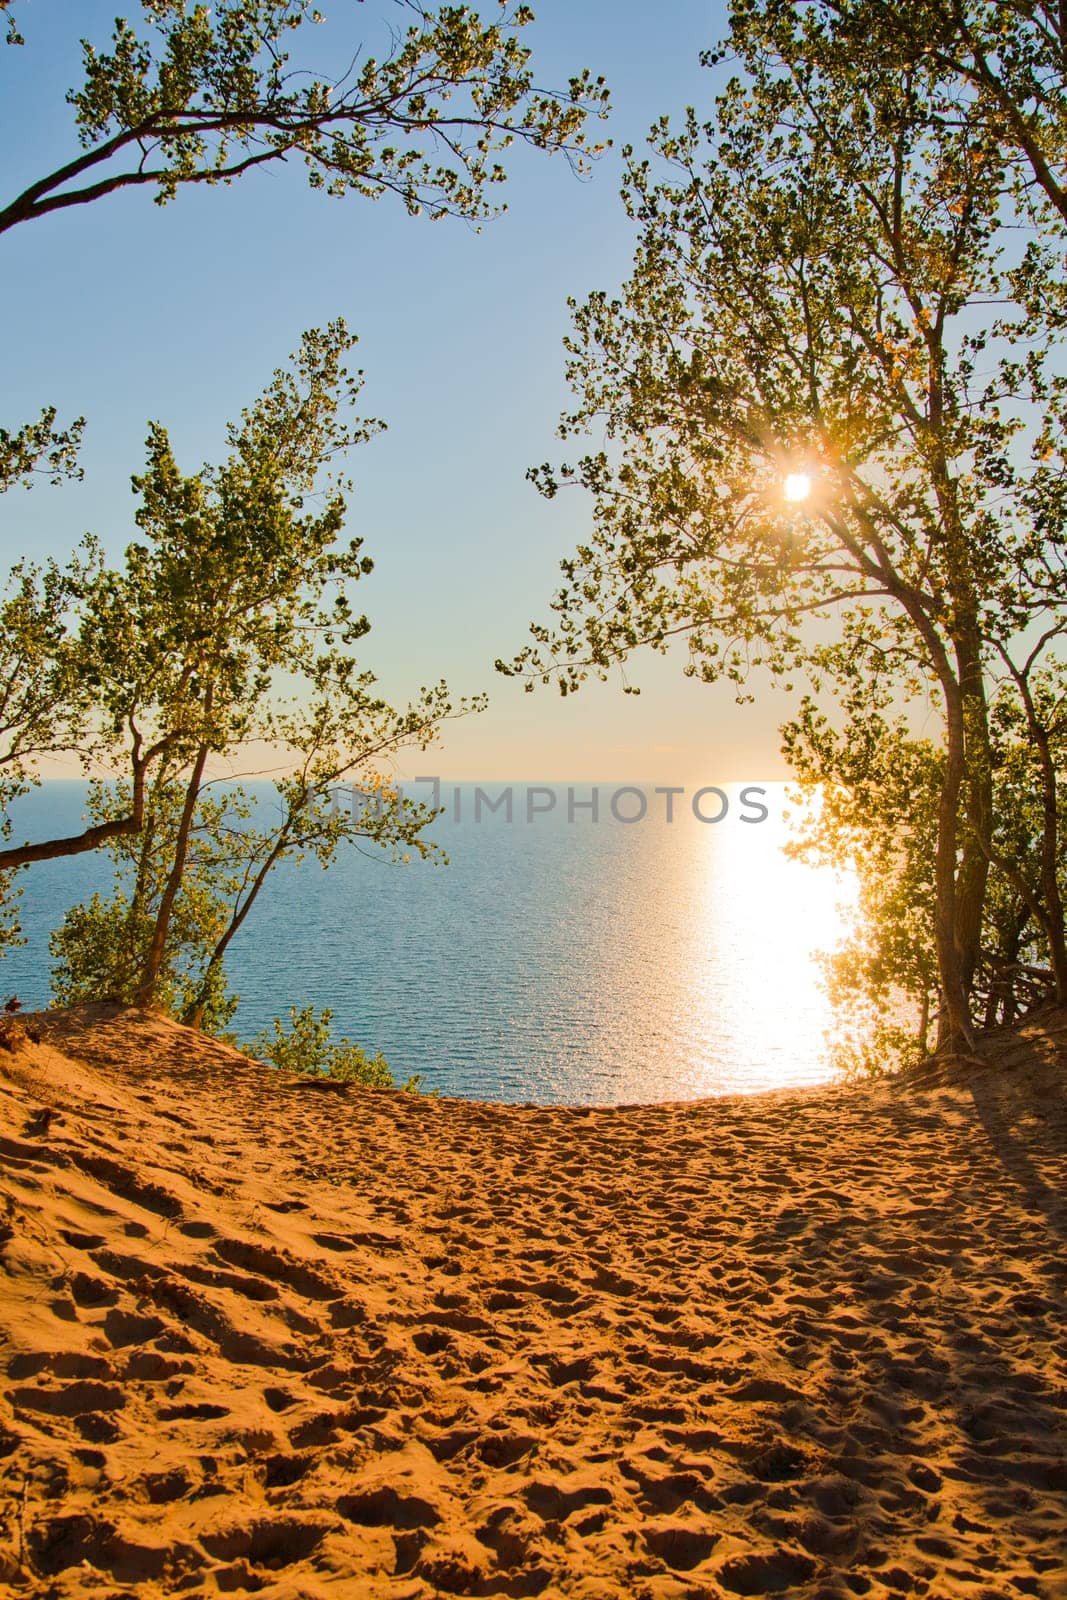 Captivating sunset view of Empire, Michigan's serene sand dunes leading to a tranquil expanse of water, creating a picturesque landscape.